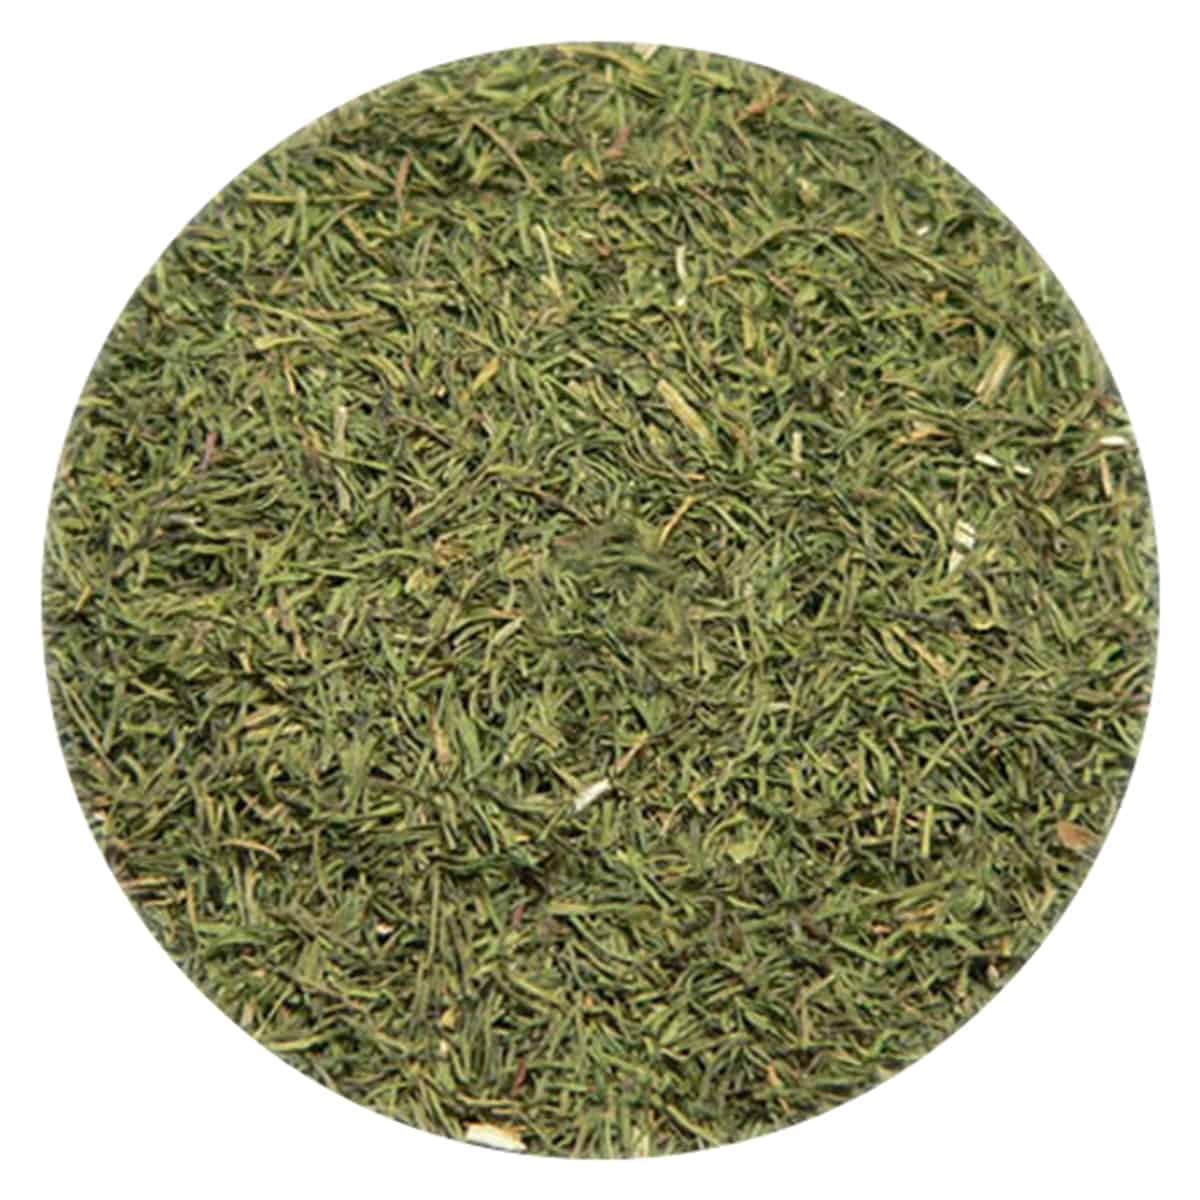 Buy IAG Foods Dried Dill Leaves (Dill Weed / Dill Tips) - 1 kg